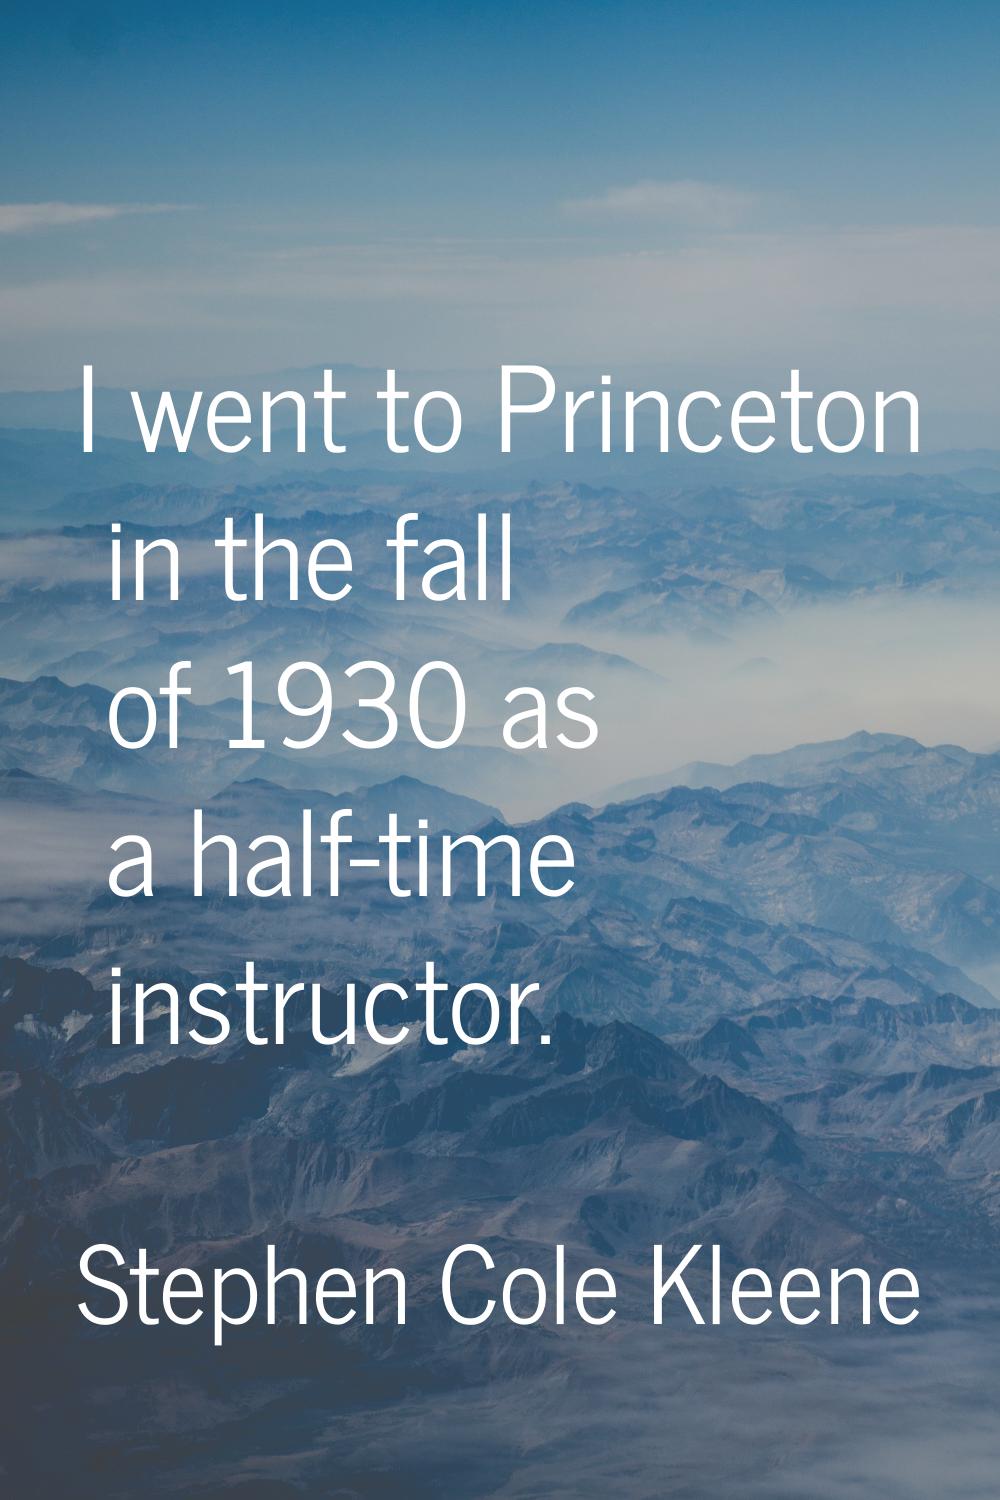 I went to Princeton in the fall of 1930 as a half-time instructor.